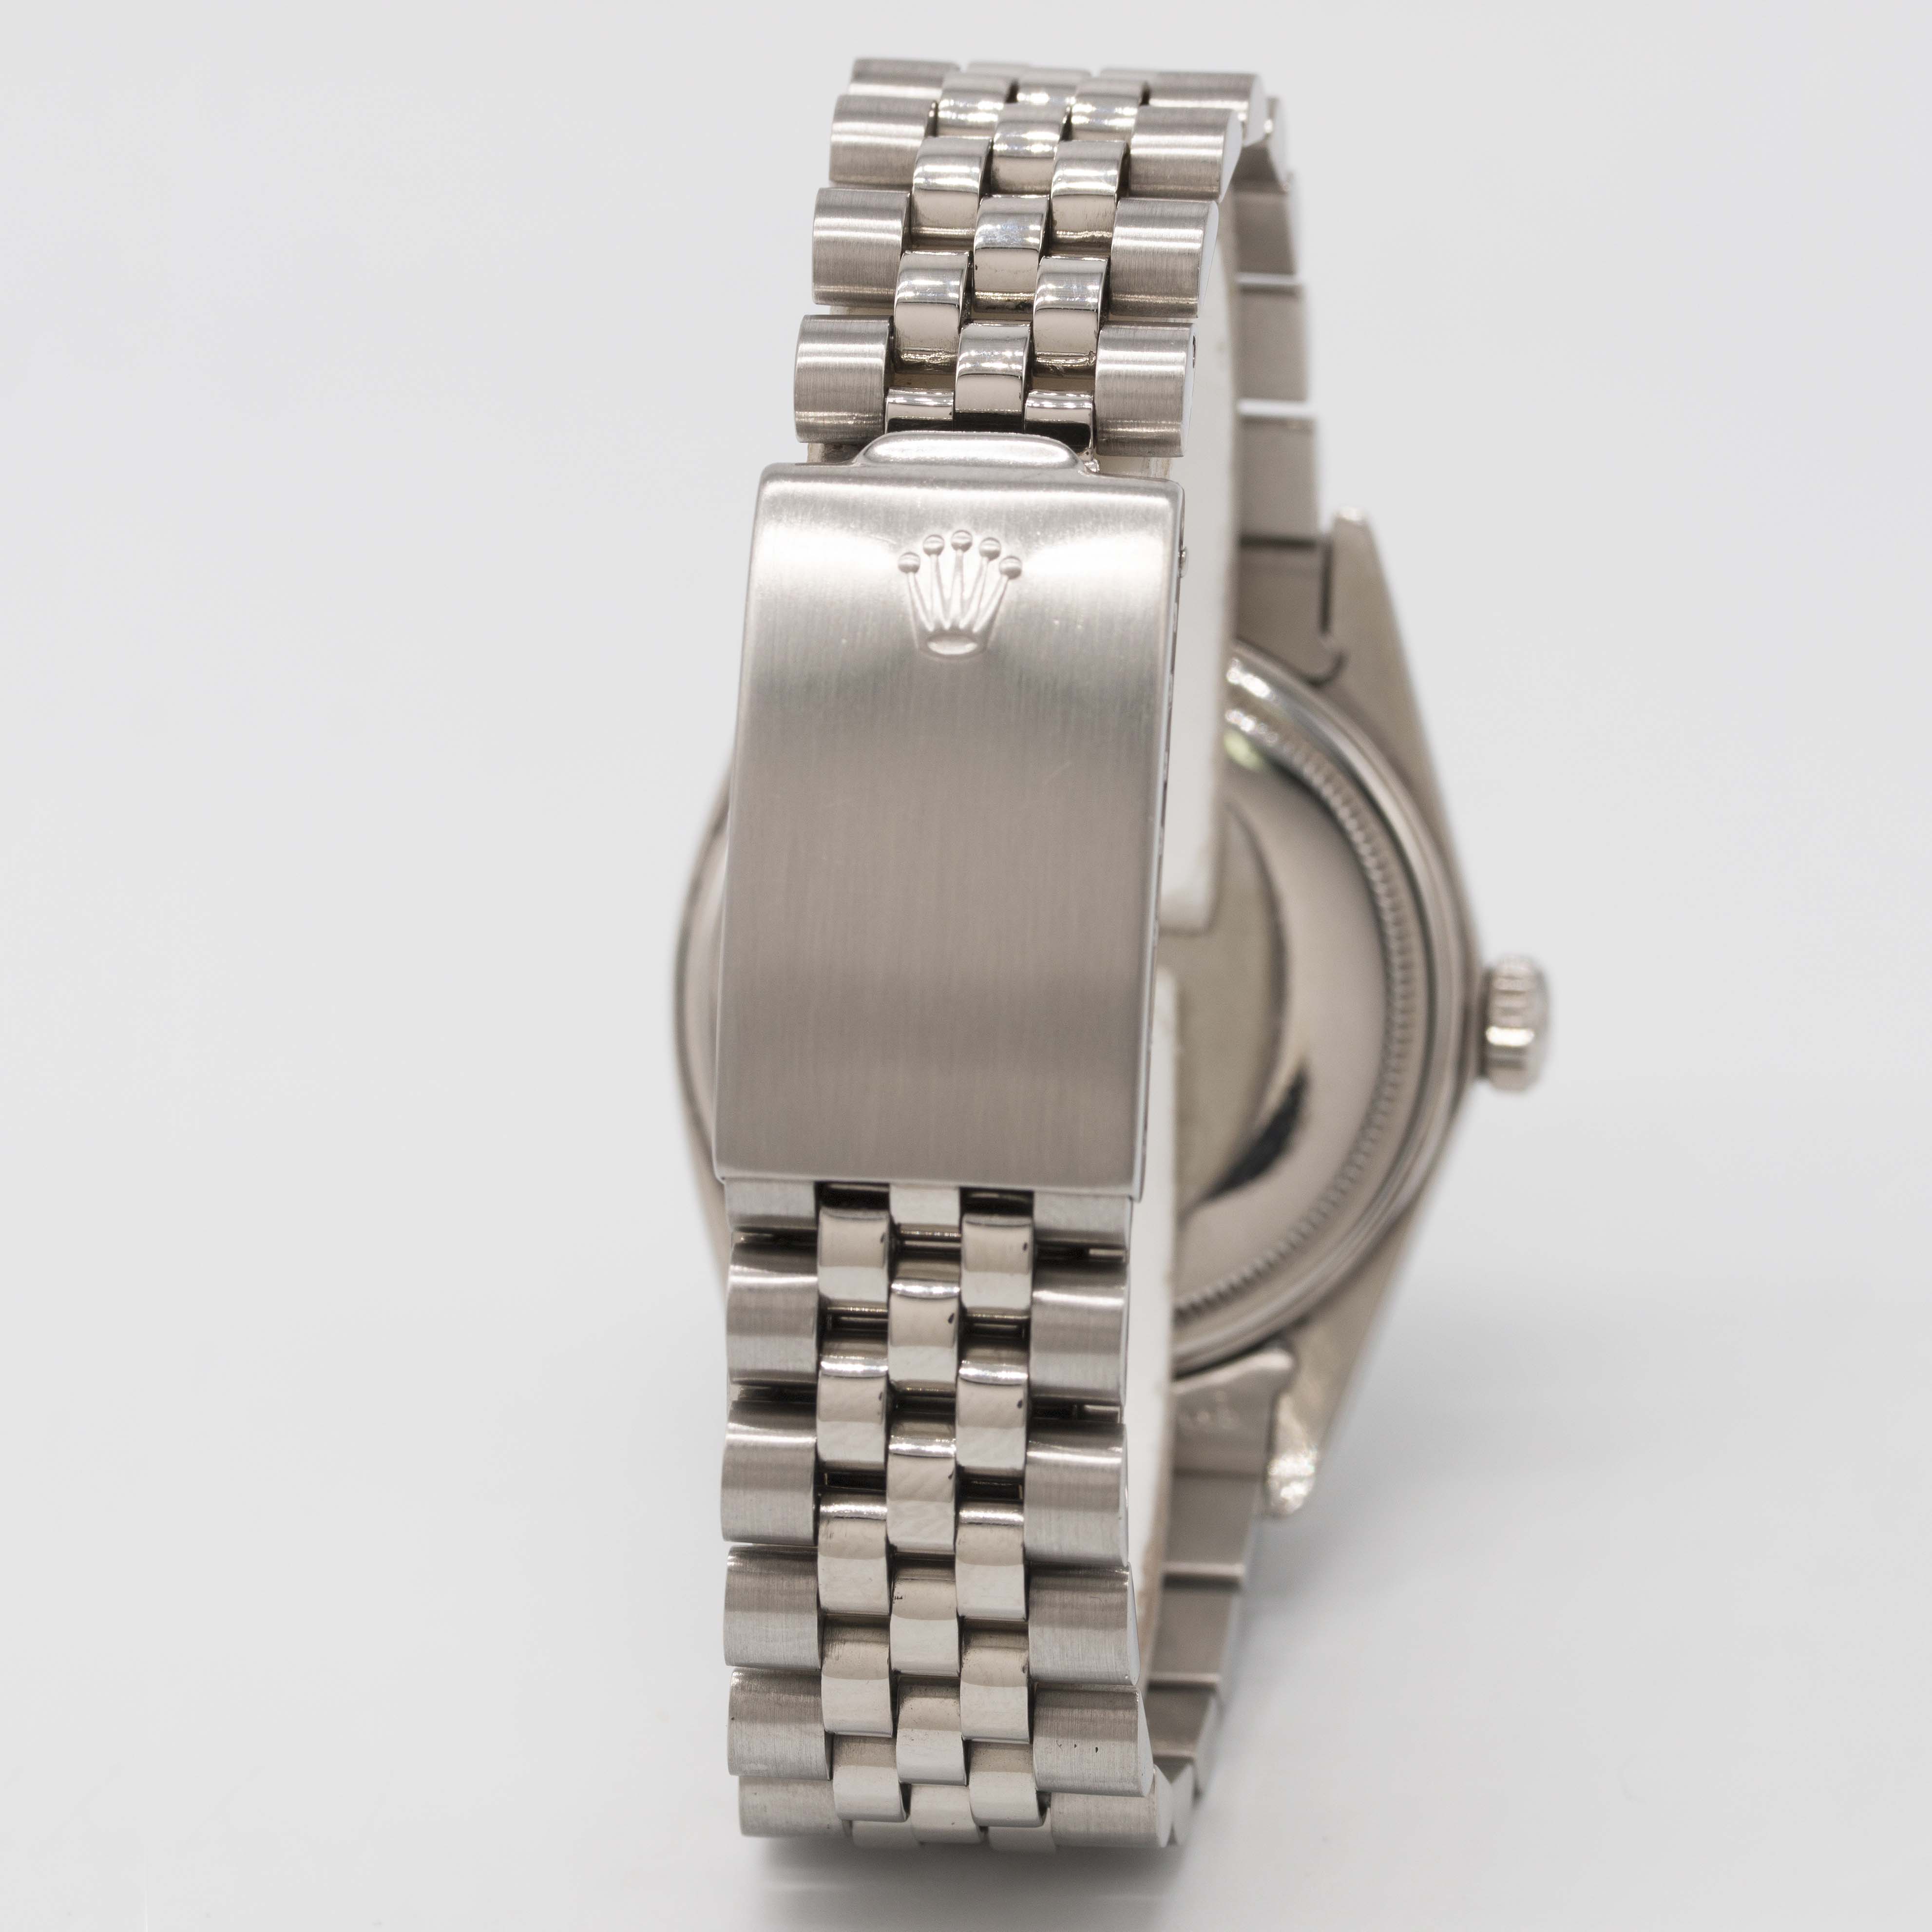 A GENTLEMAN'S STEEL & WHITE GOLD ROLEX OYSTER PERPETUAL DATEJUST BRACELET WATCH CIRCA 1984, REF. - Image 6 of 11